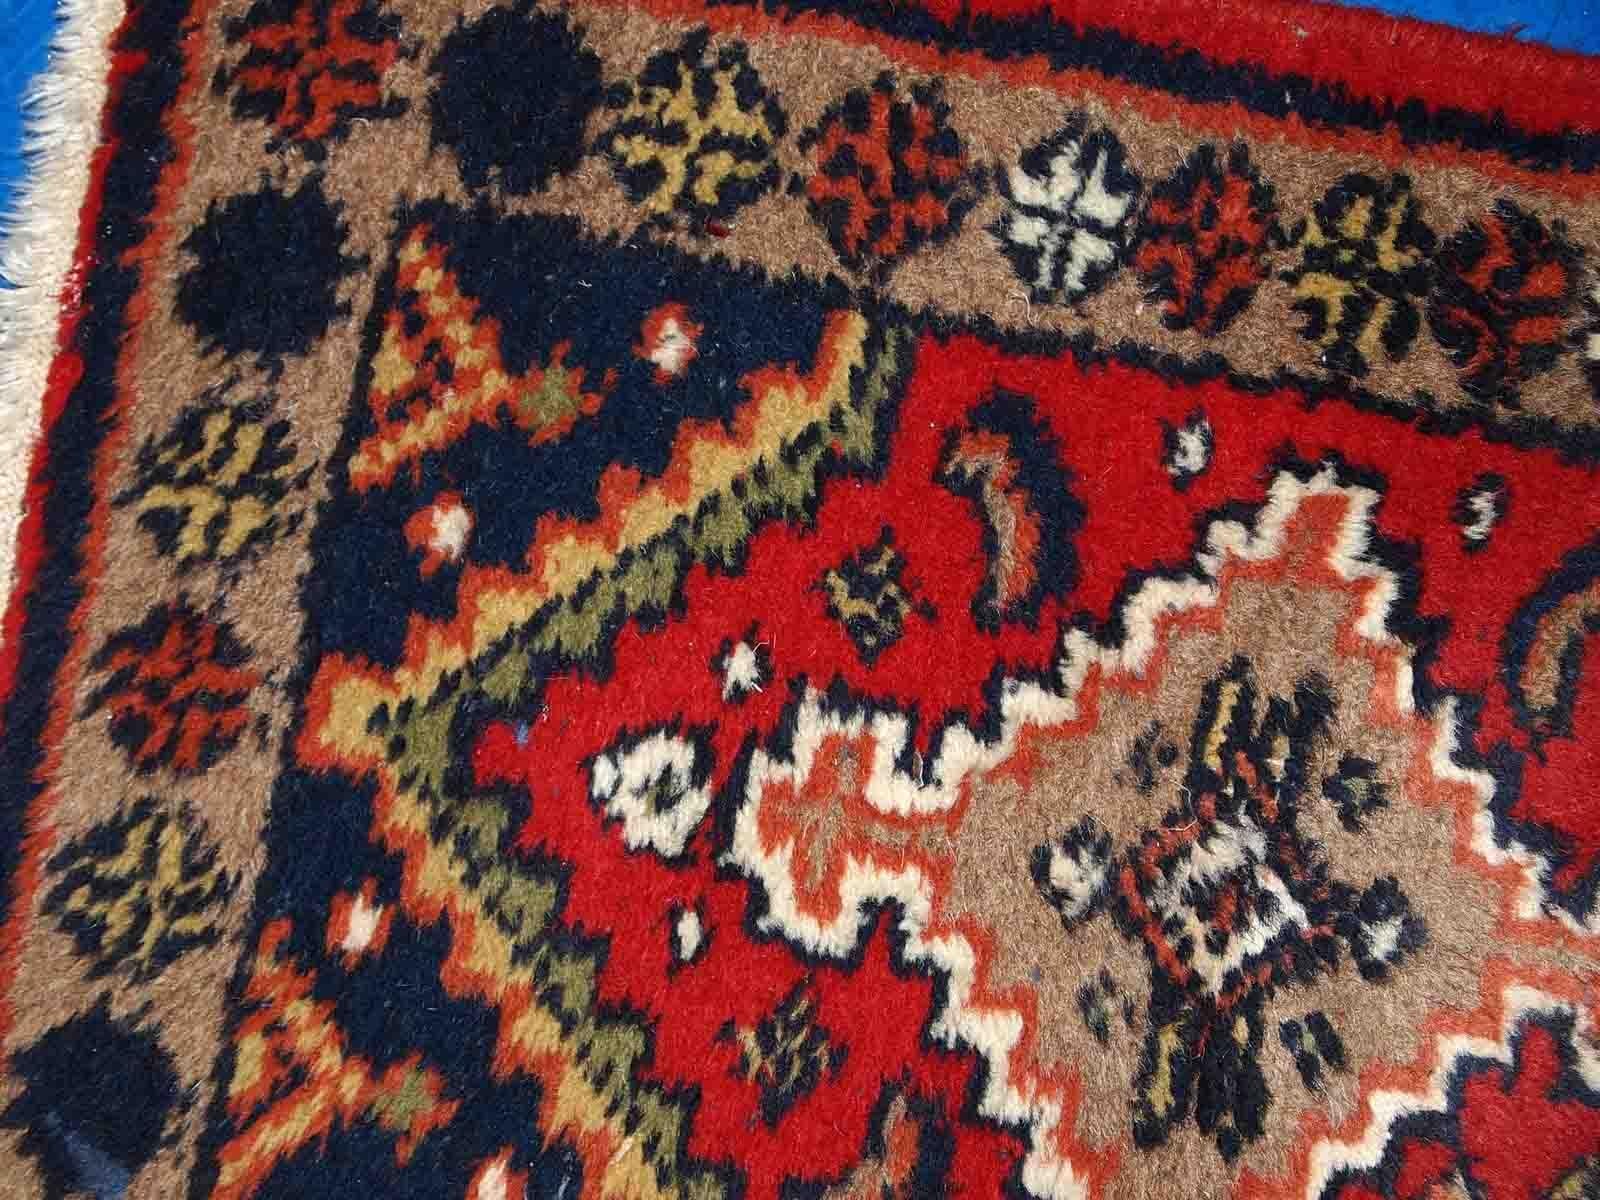 Vintage handmade Middle Eastern mat in original good condition. The rug is from the end of 20th century.

-condition: original good, 

-circa: 1970s,

-size: 1.4' x 1.9' (42cm x 60cm),

-material: wool,

-country of origin: Middle